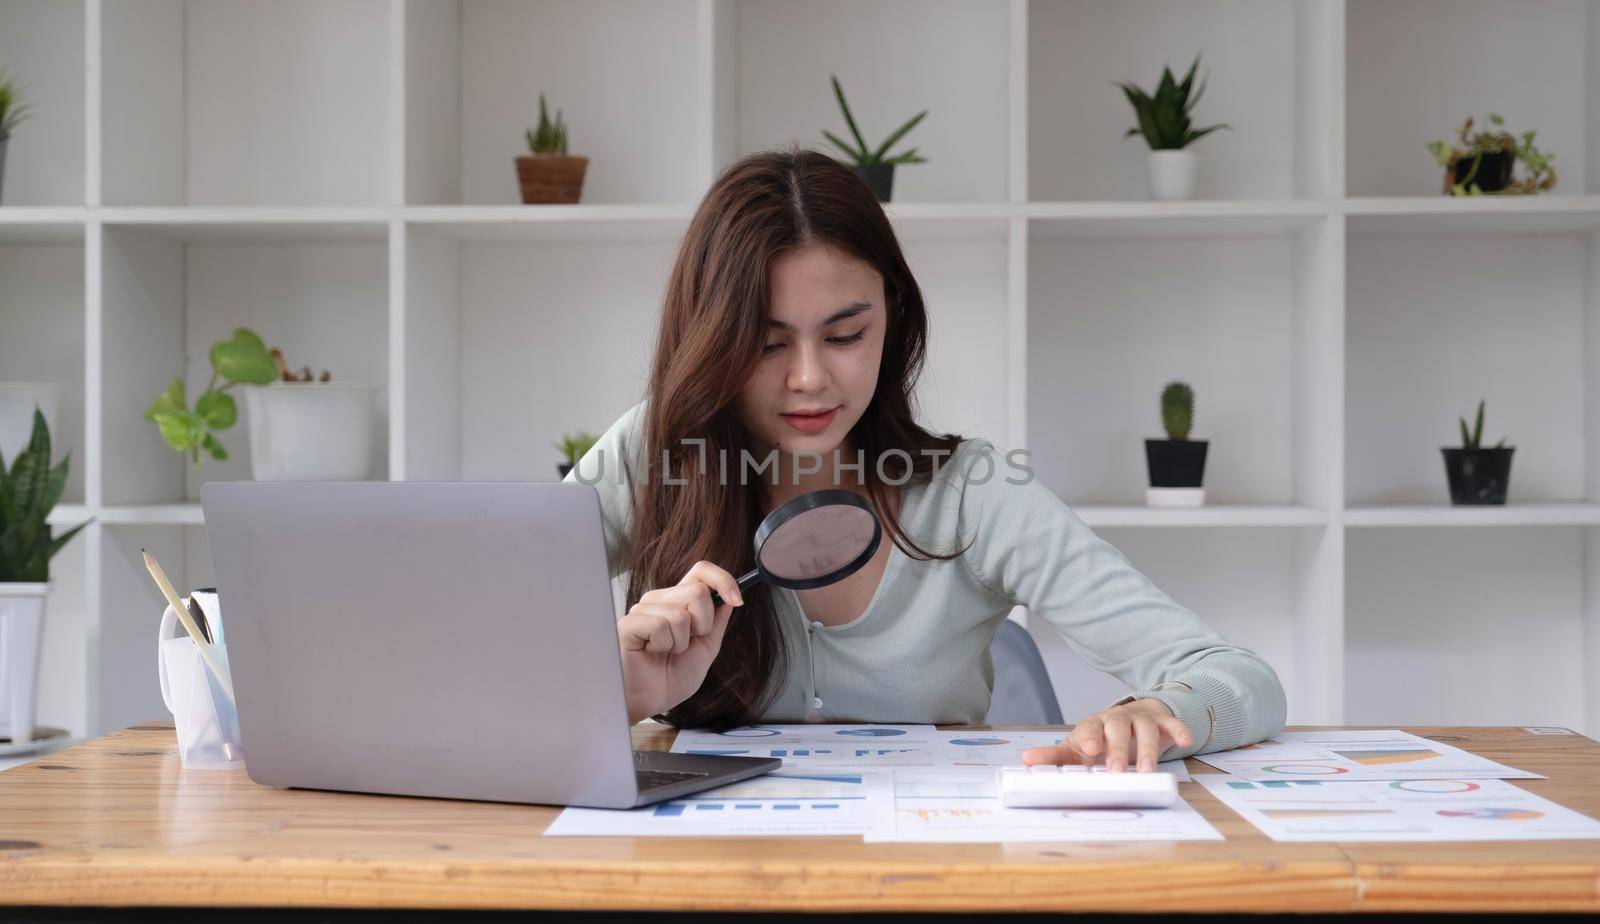 Tax inspector and financial auditor looking through magnifying glass, inspecting company financial papers, documents and reports by wichayada